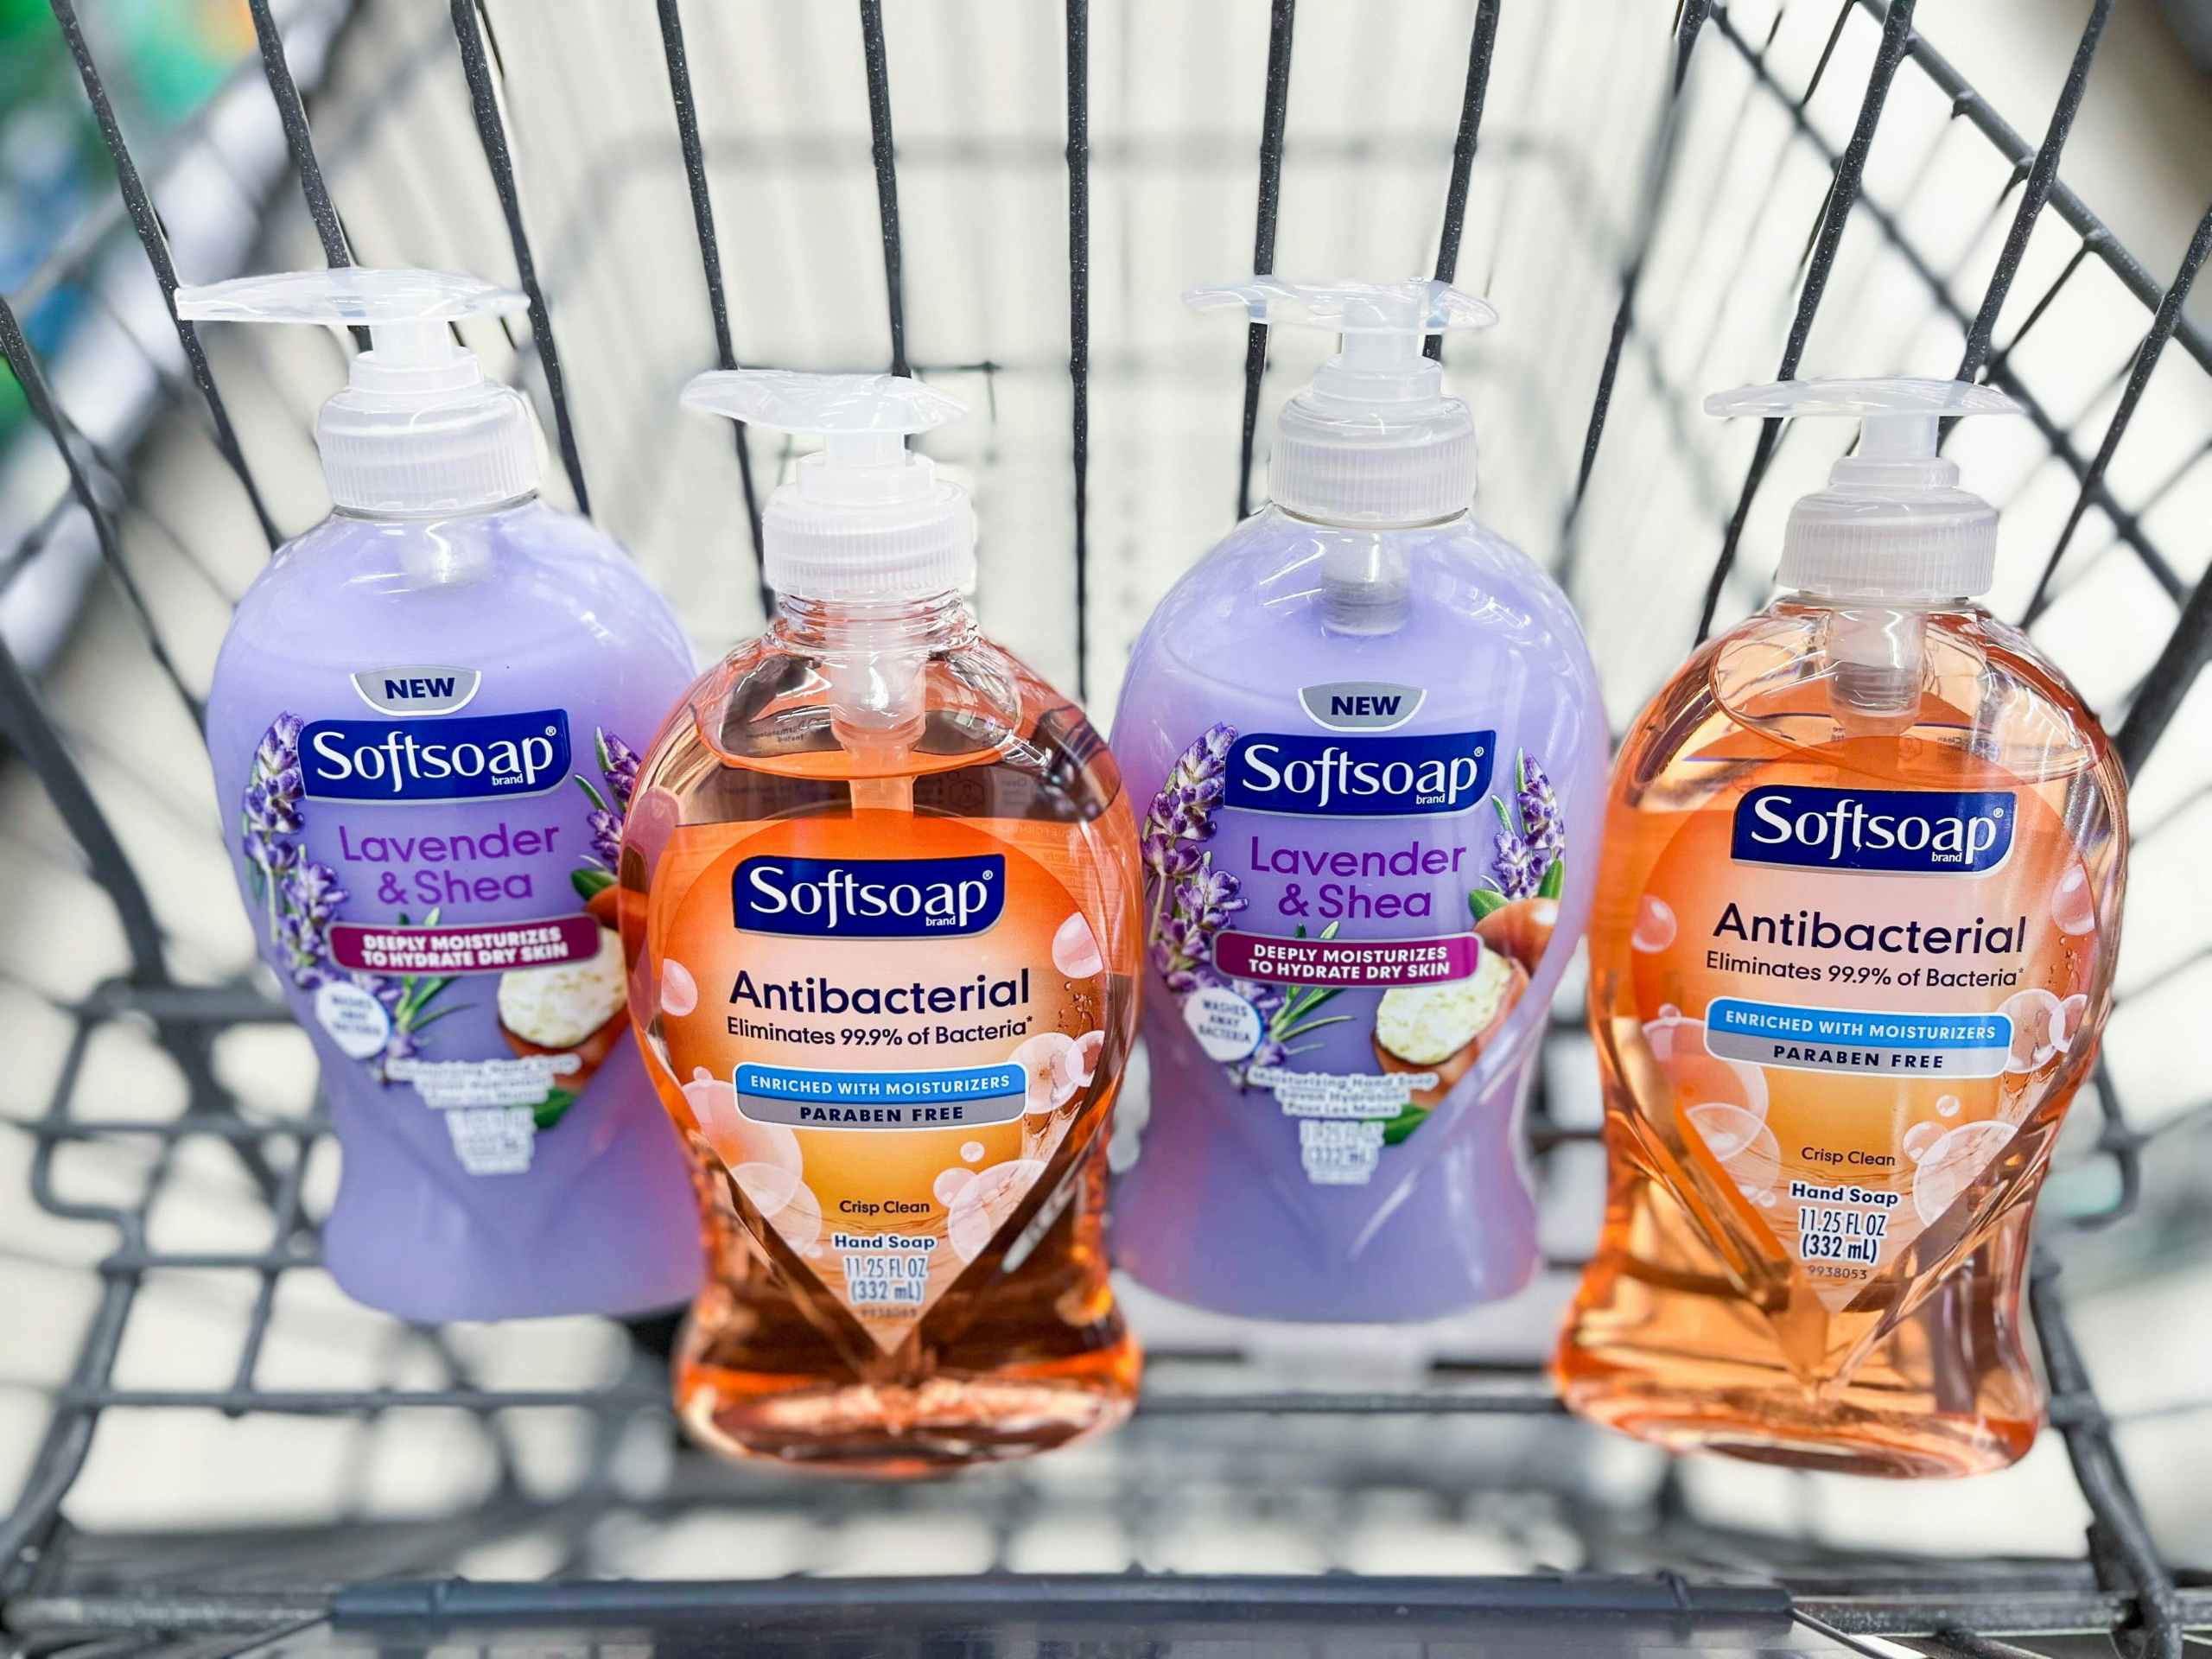 A row of Softsoap antibacterial hand soaps in a cart.